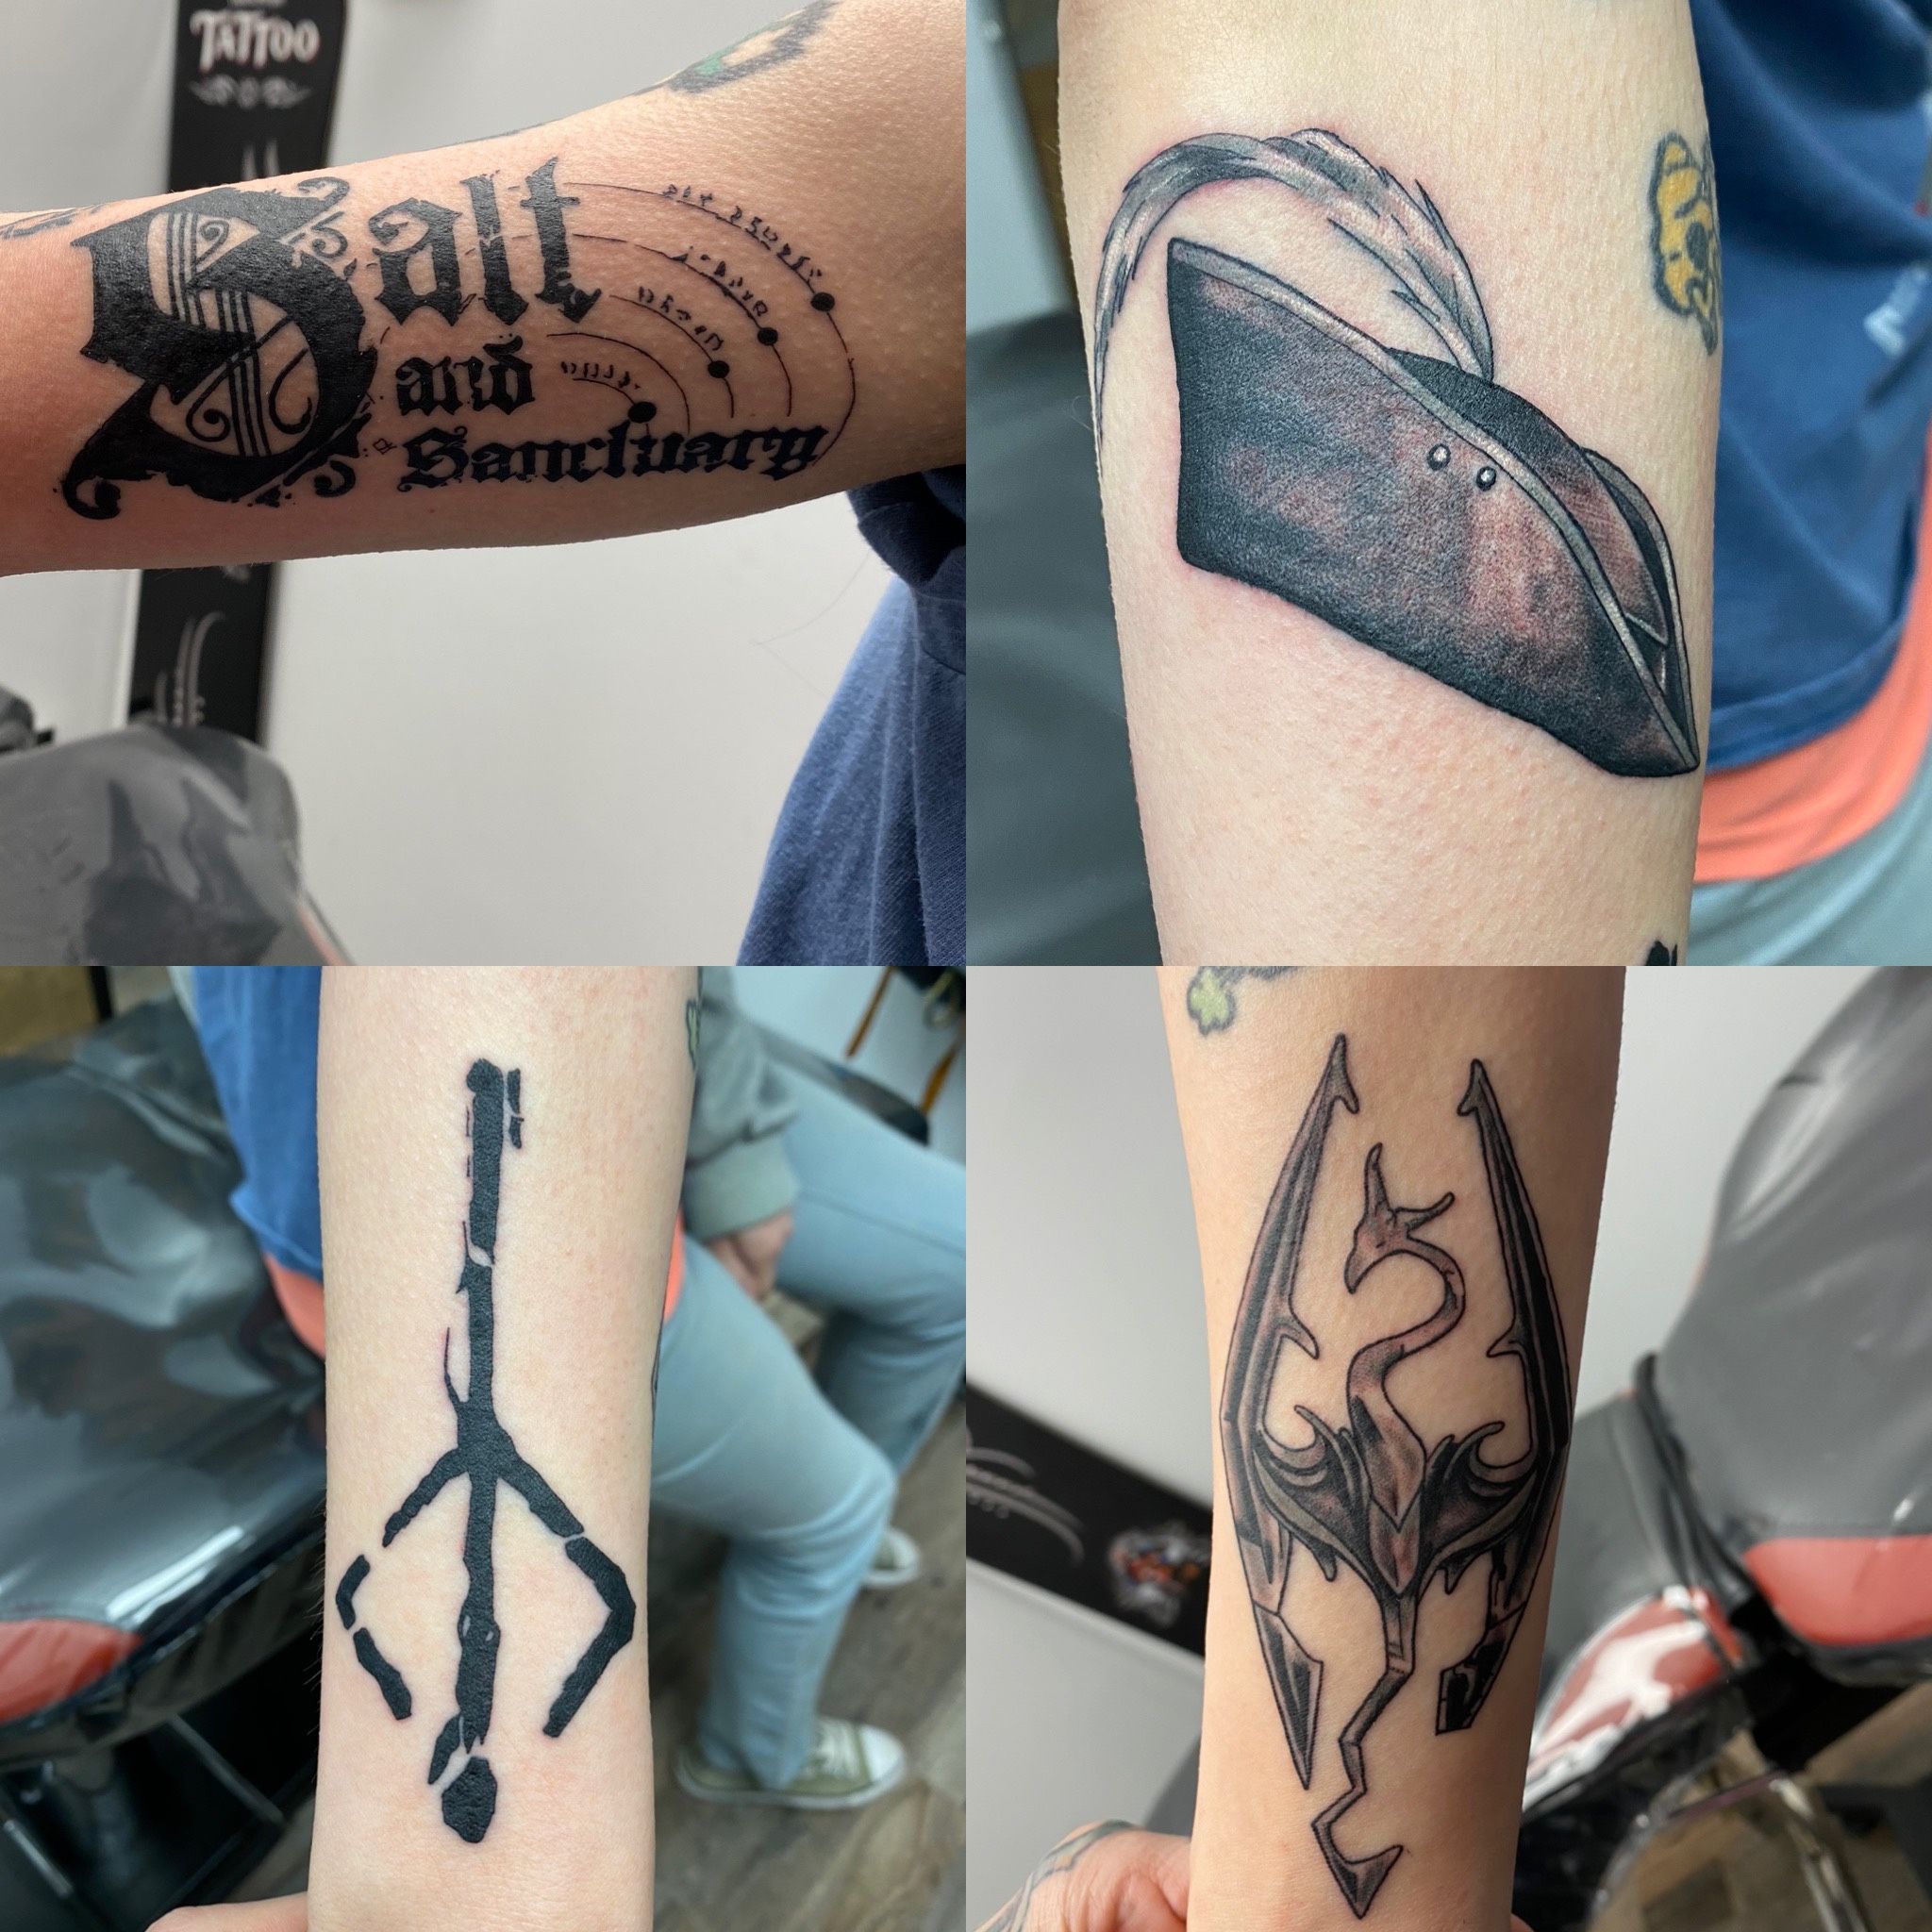 The awesome tattoos of my friend and his girlfriend : r/gaming